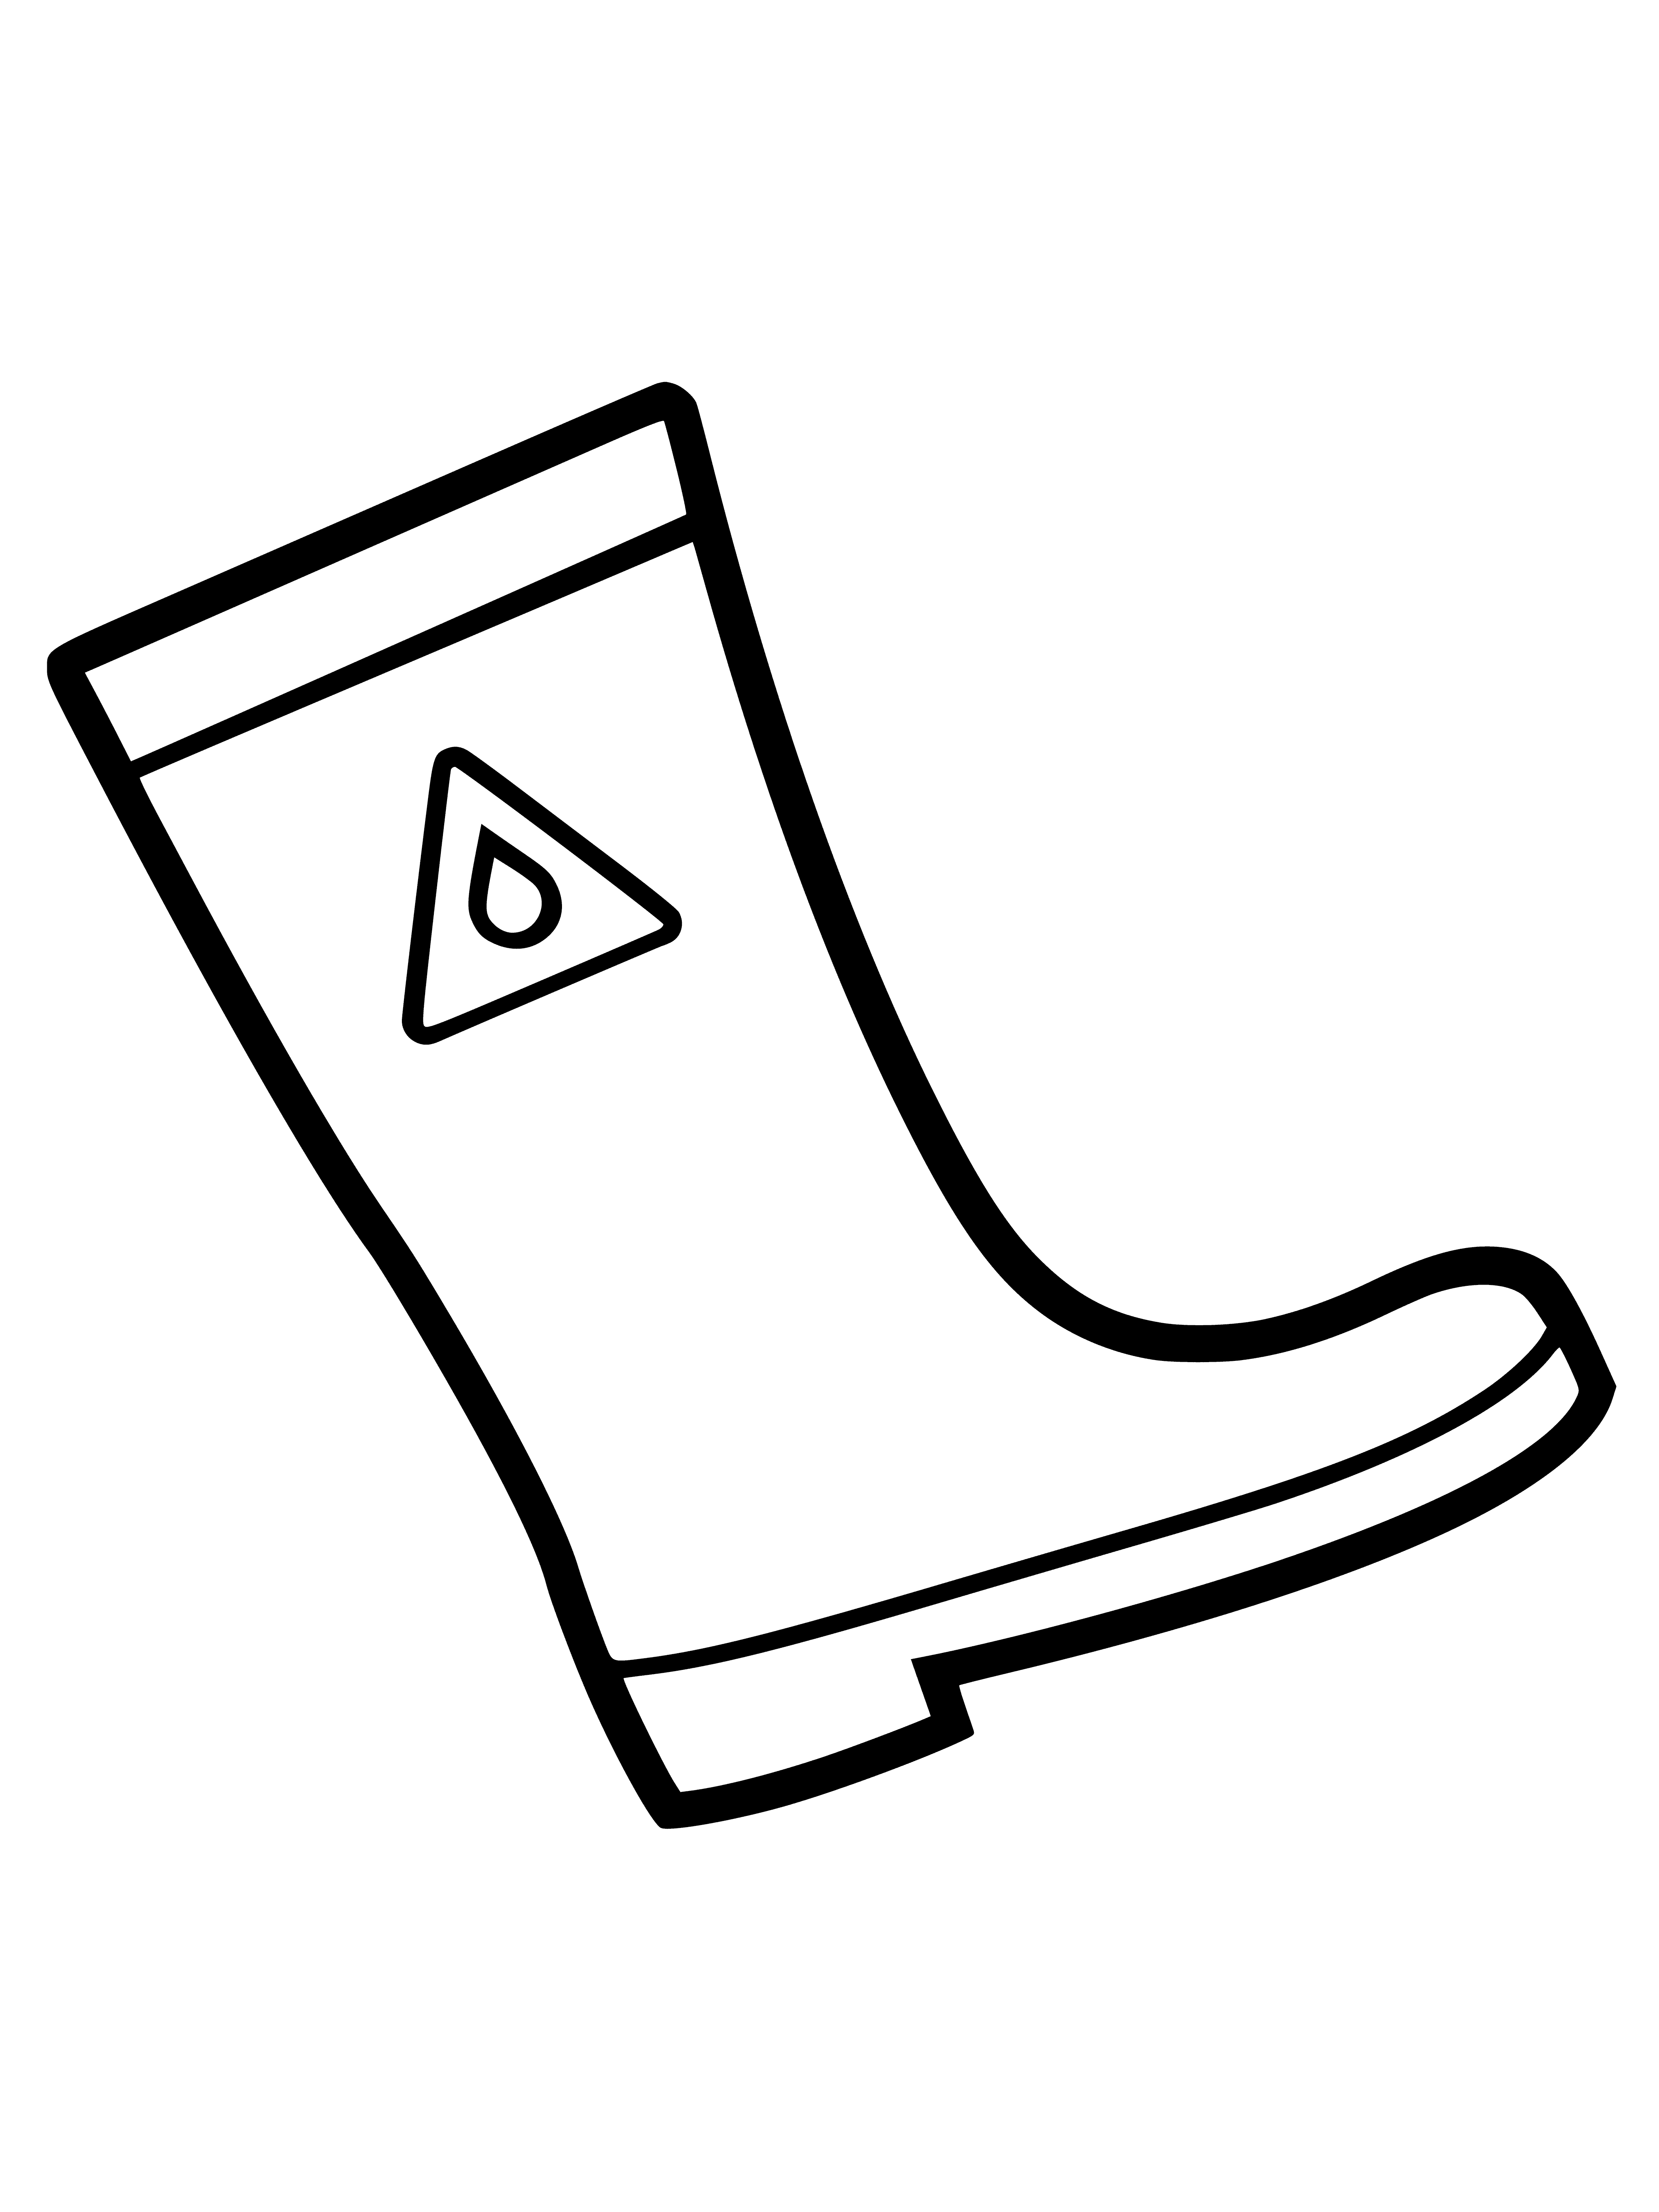 coloring page: Brown boot with lace-up front & black sole made of rubber is on the ground.